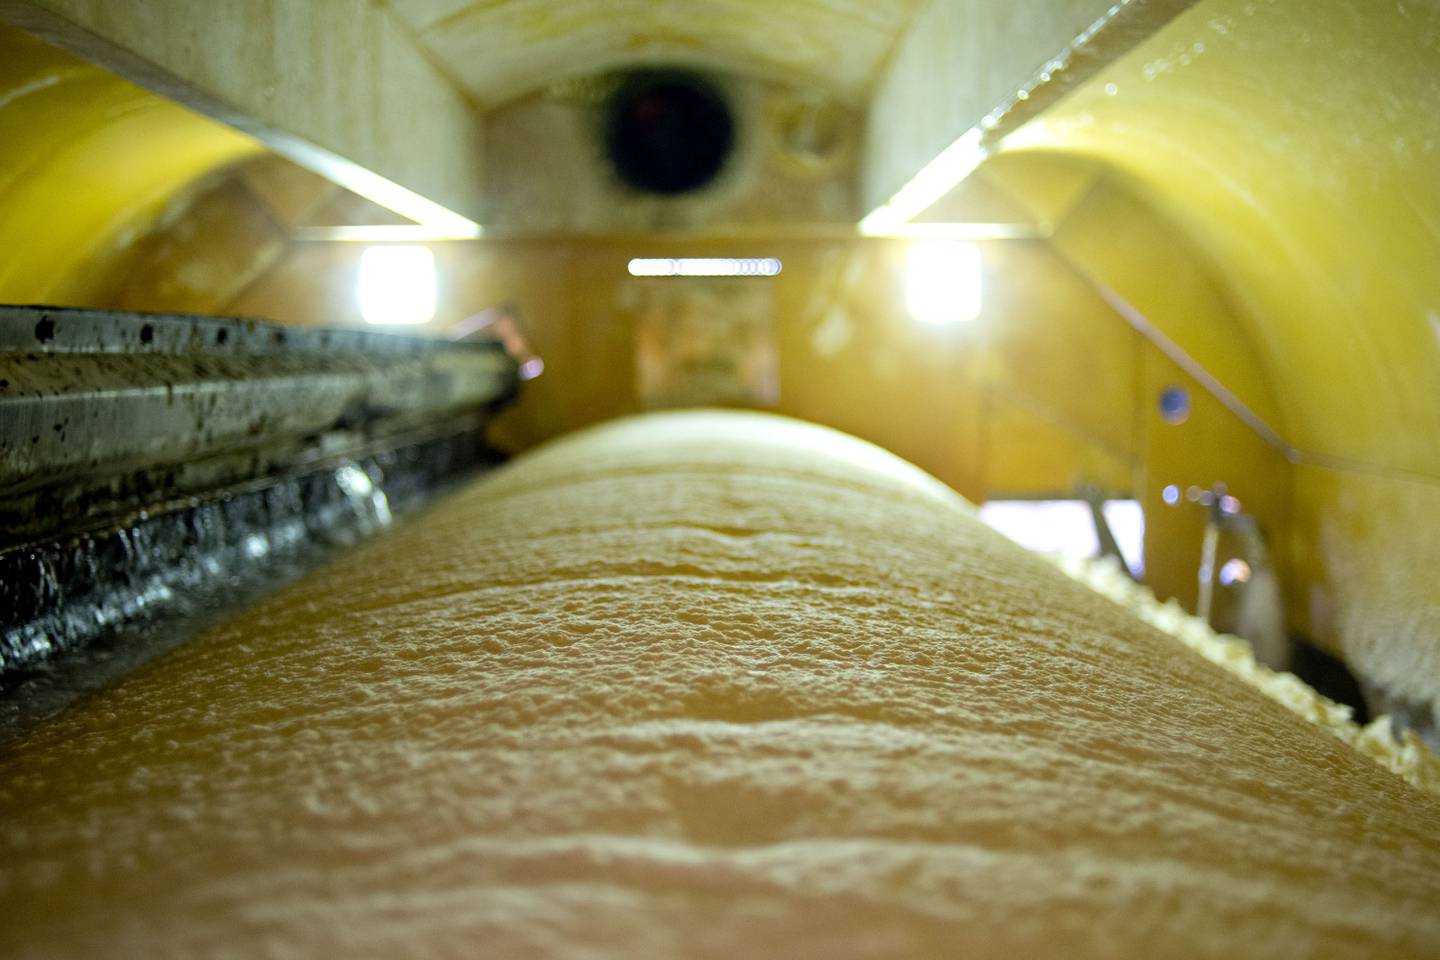 Wood pulp is being processed at a paper mill.